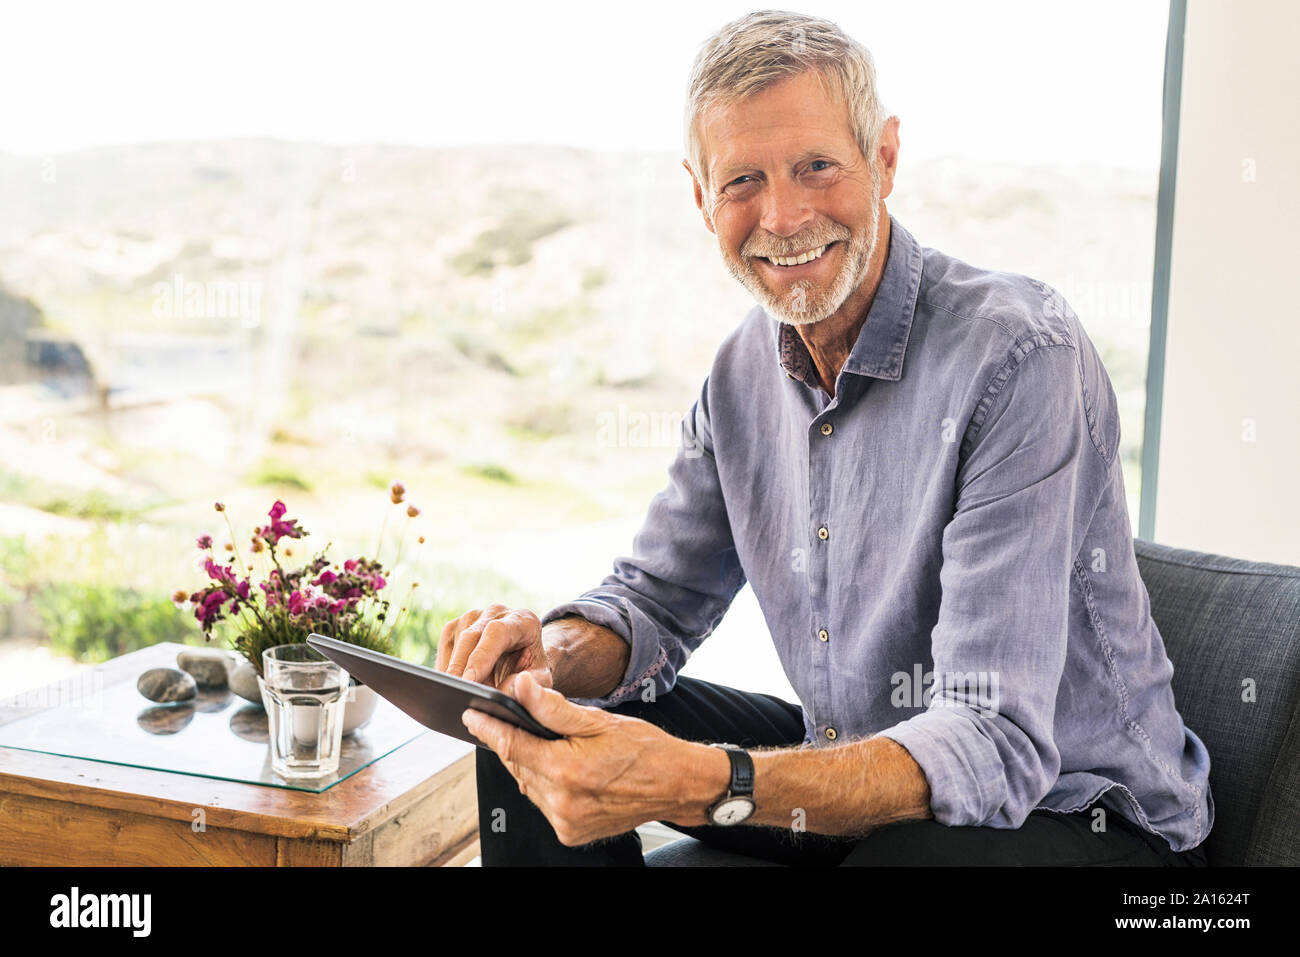 Portrait of smiling senior woman using tablet at home Banque D'Images